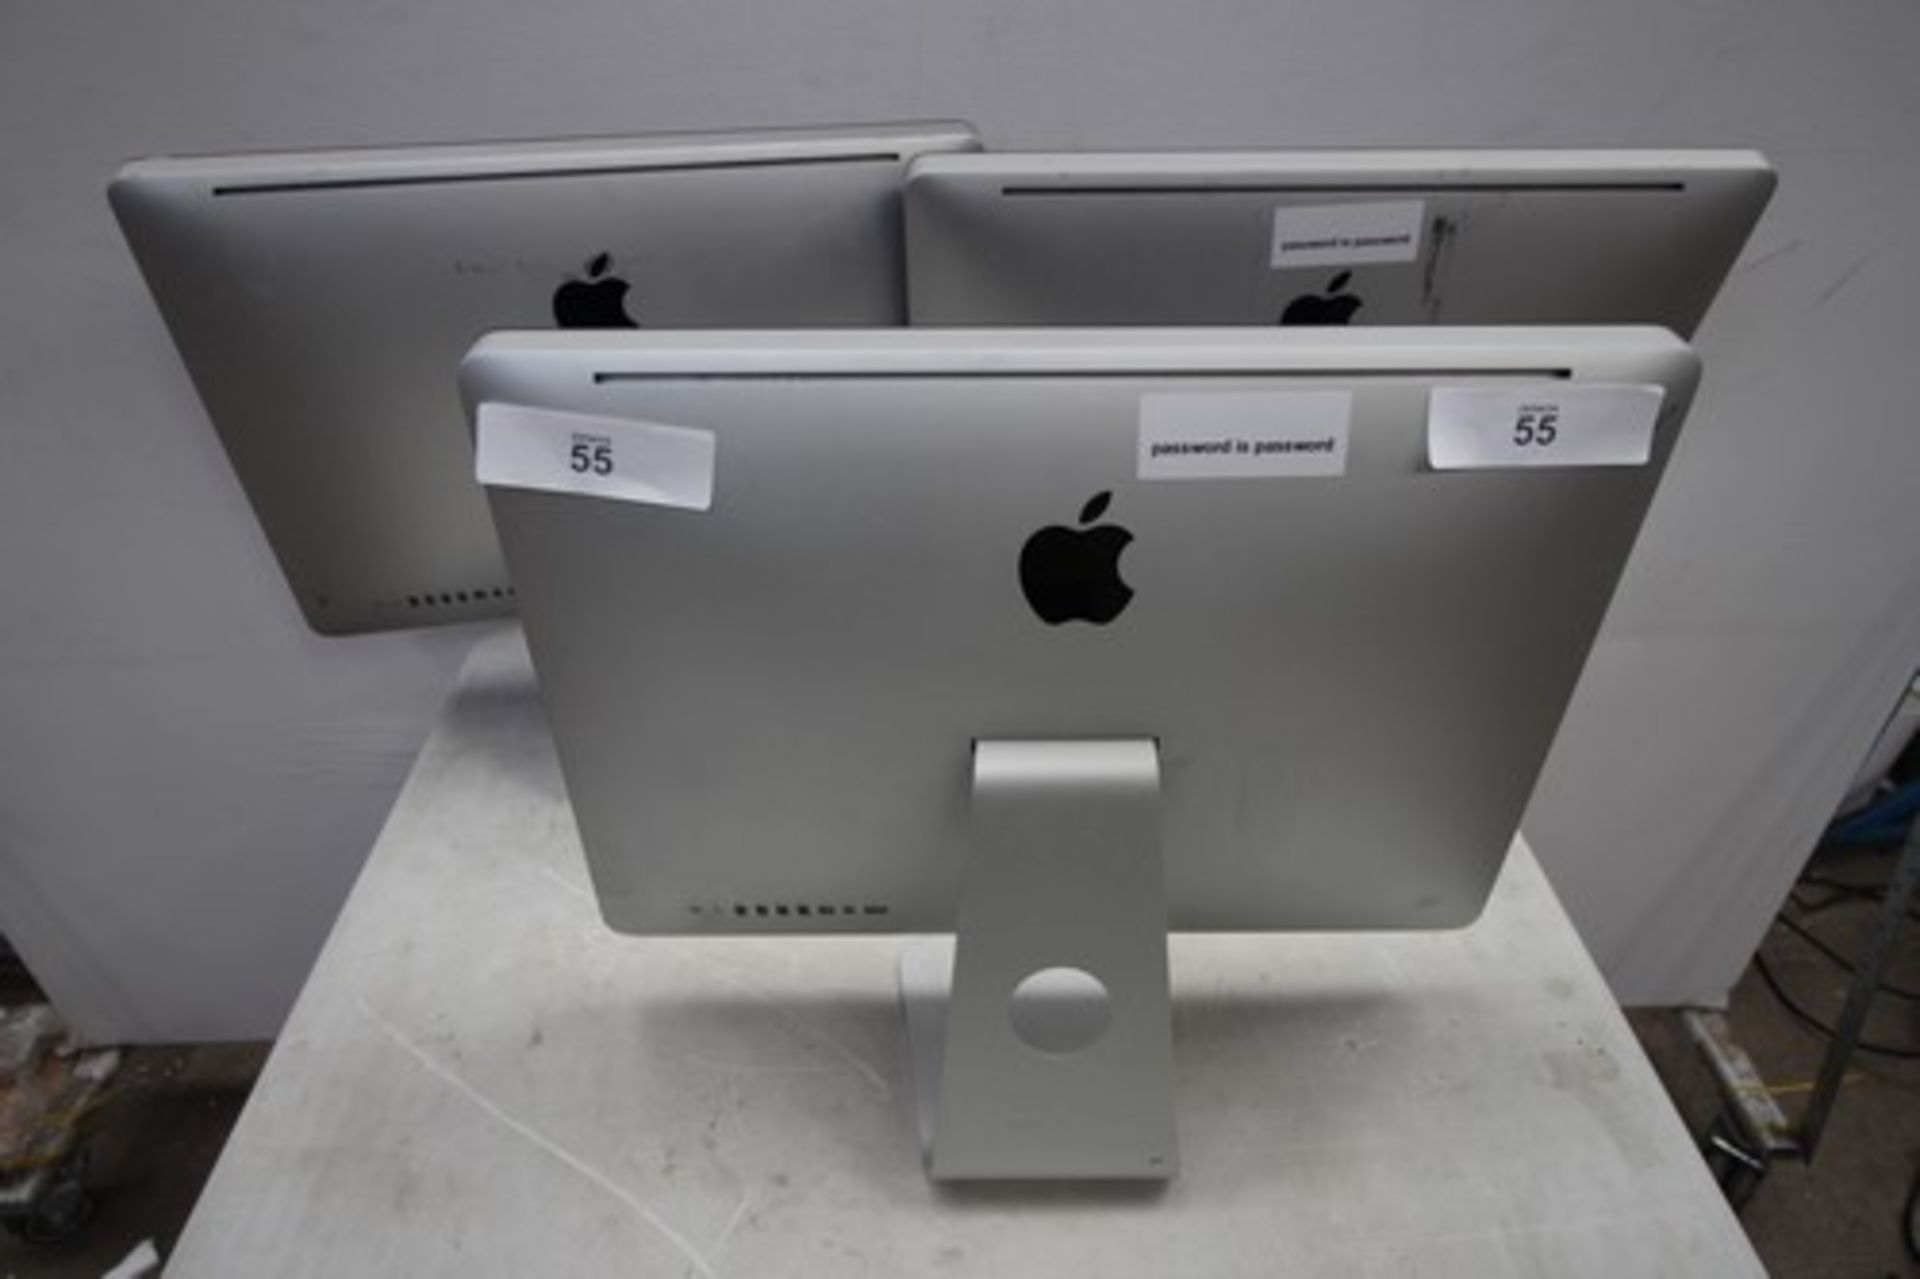 3 x Apple iMac 21.5" desktop computers, model No: A1311, powers on ok, not tested - second-hand ( - Image 3 of 4